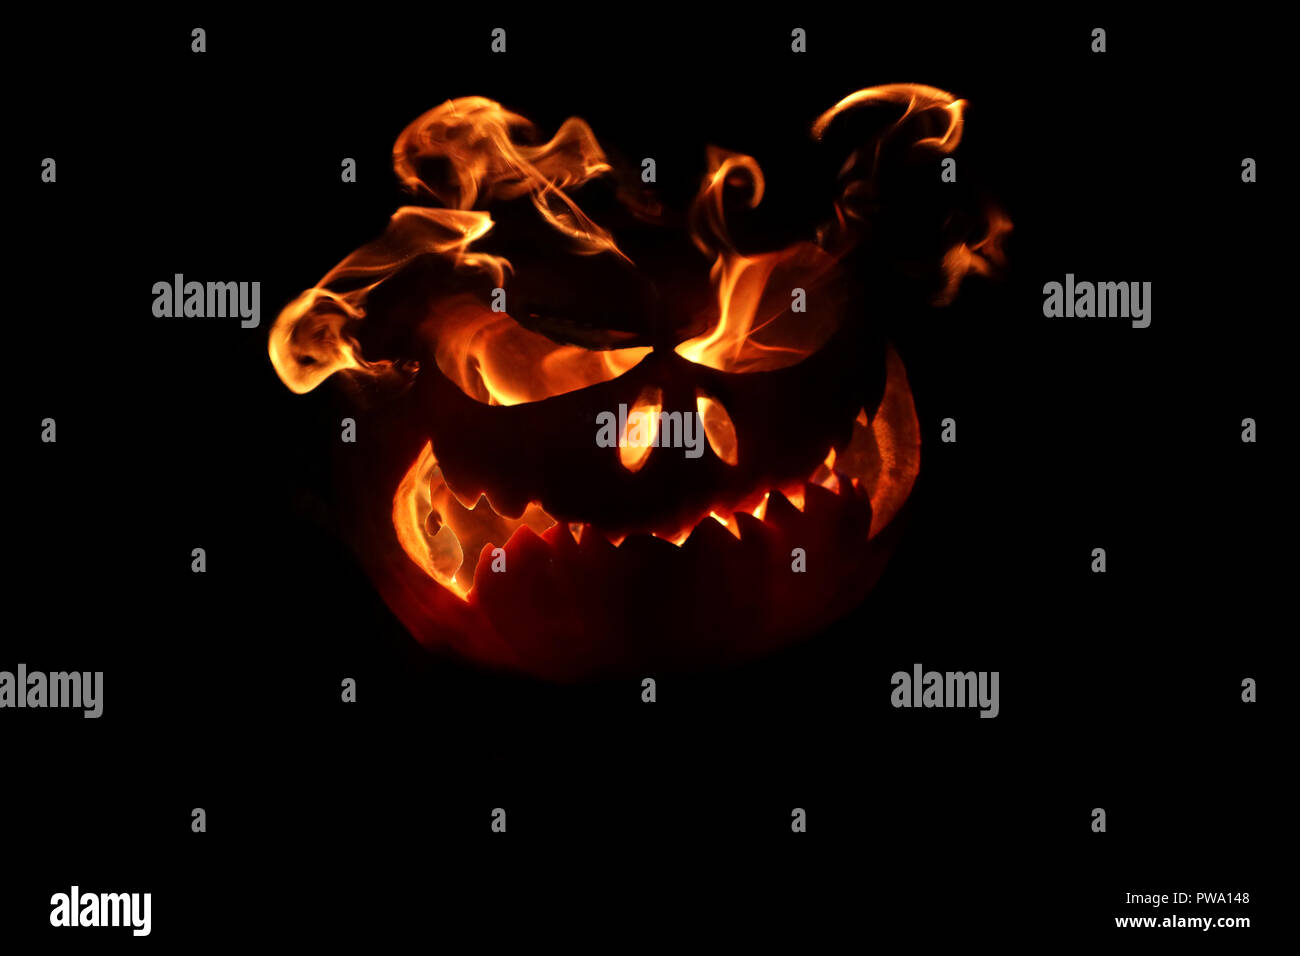 halloween pumpkin with flames from eyes on dark background Stock Photo